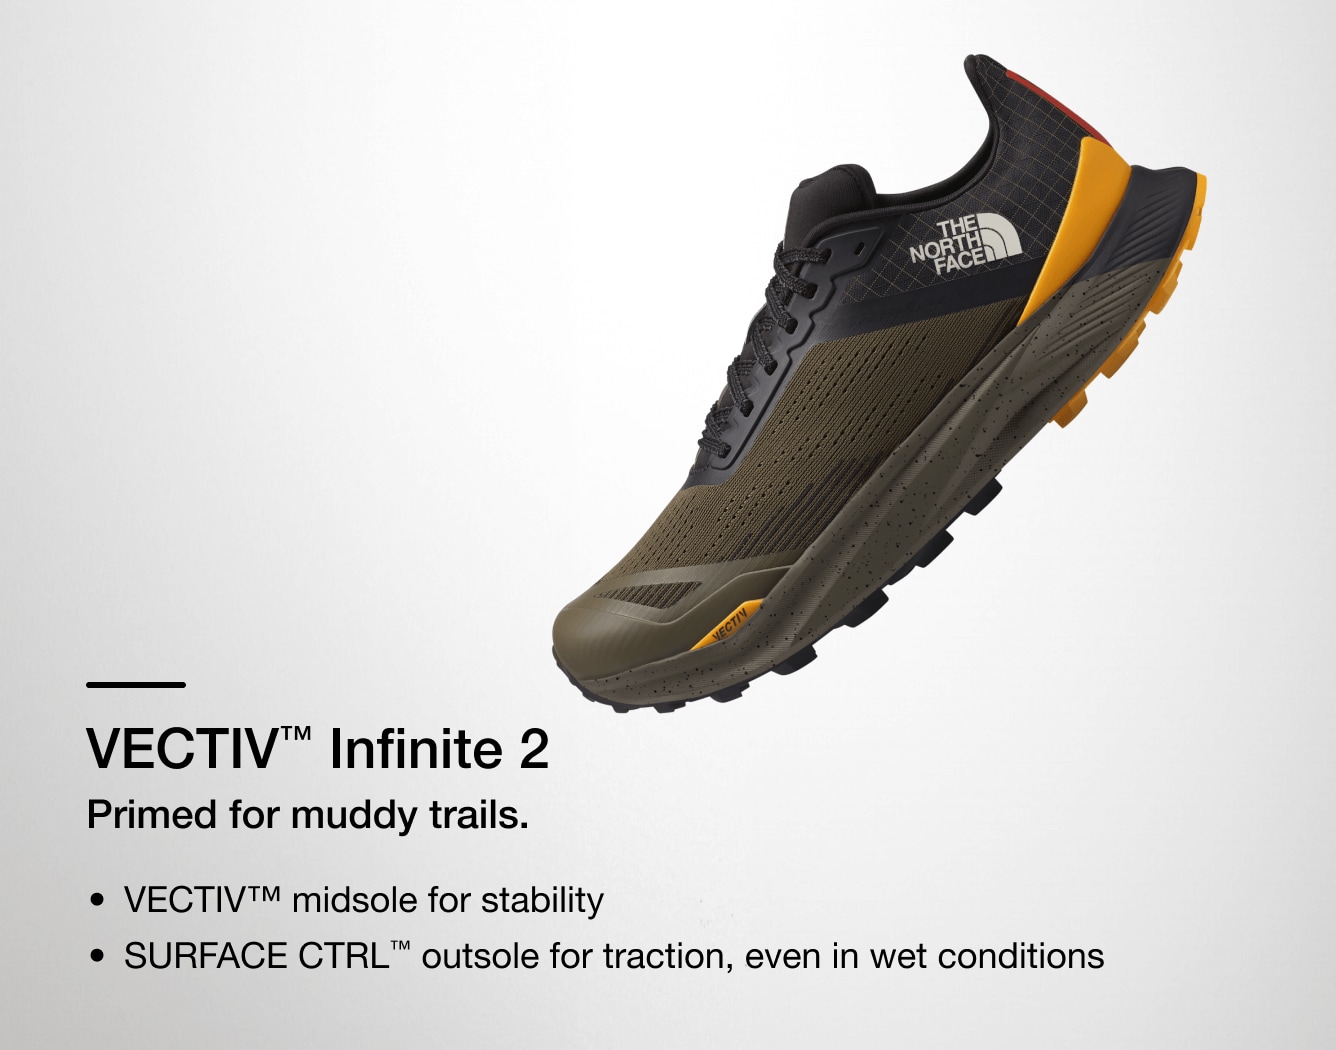 Studio shot of the VECTIV Infinite trail running shoe from The North Face with text overlay detailing features.